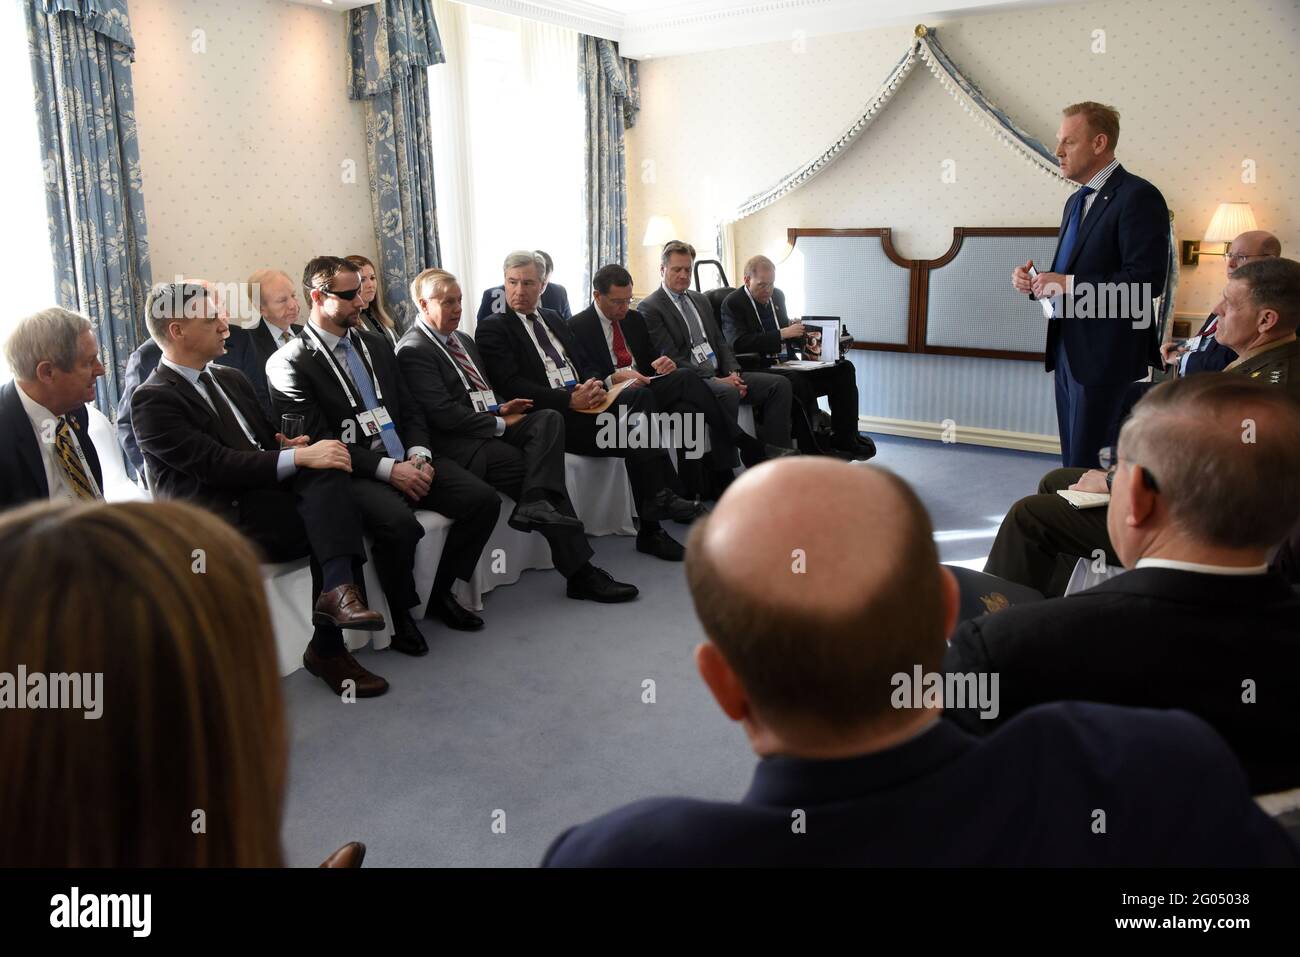 Reportage:   U.S. Acting Secretary of Defense Patrick M. Shanahan meets with a congressional delegation led by U.S. Senator Lindsey Graham, on the sidelines of the Munich Security Conference, Munich, Germany, Feb. 16, 2019. Stock Photo